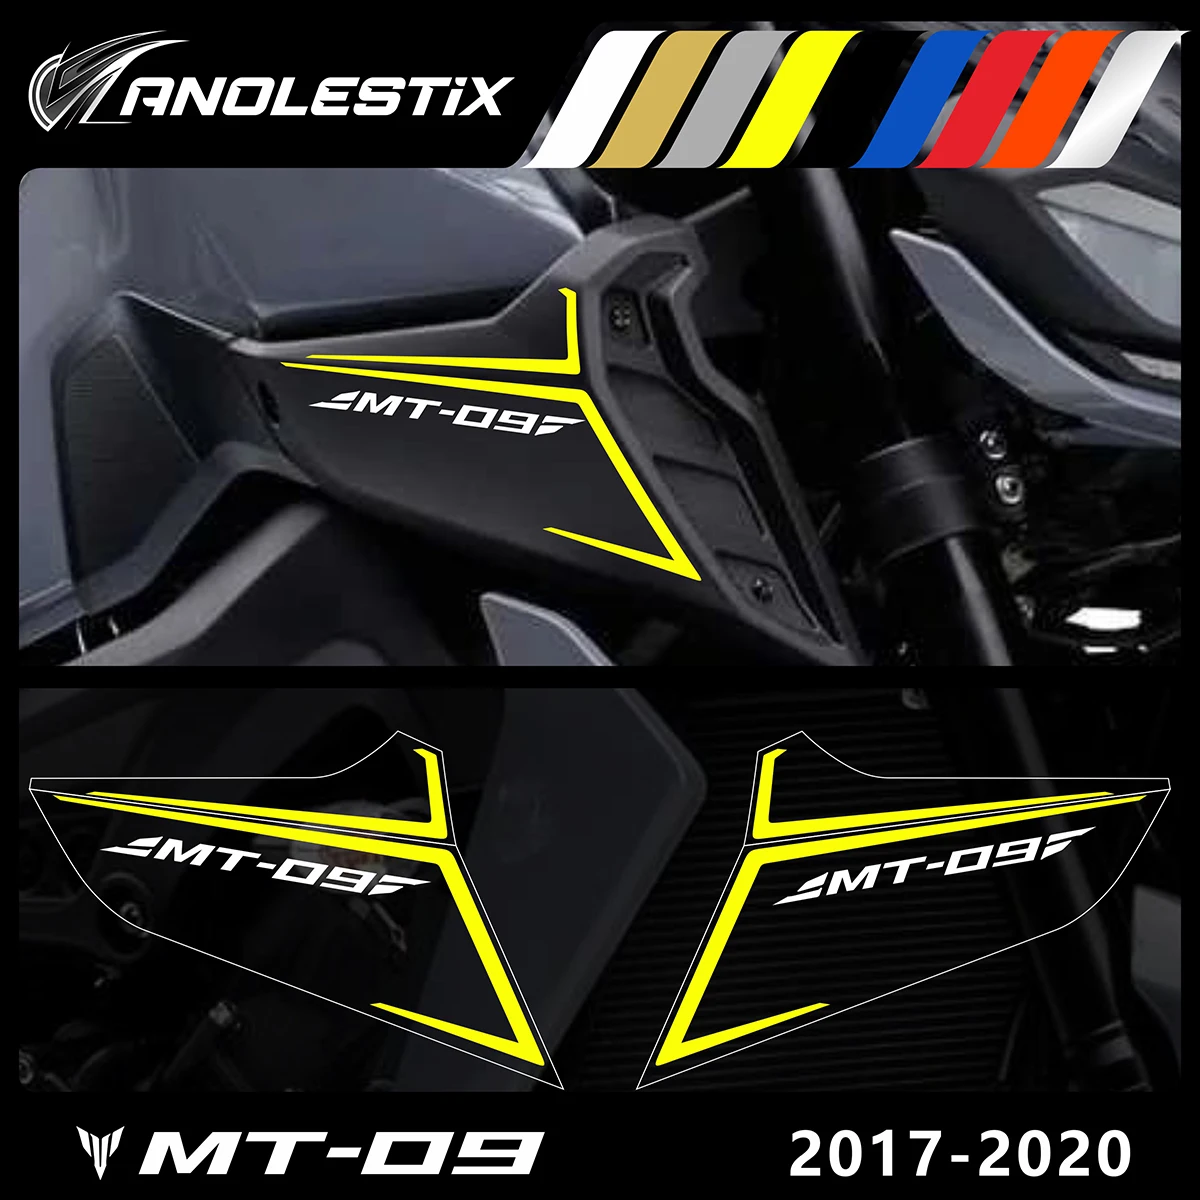 AnoleStix Reflective Motorcycle Stickers Air Intake Side Cover Decals Set For YAMAHA MT09 MT-09 SP 2017 2018 2019 2020 new genuine intake air temperature sensor 56028364aa for dodge journey chrysler sebring jeep ram 2001 2020